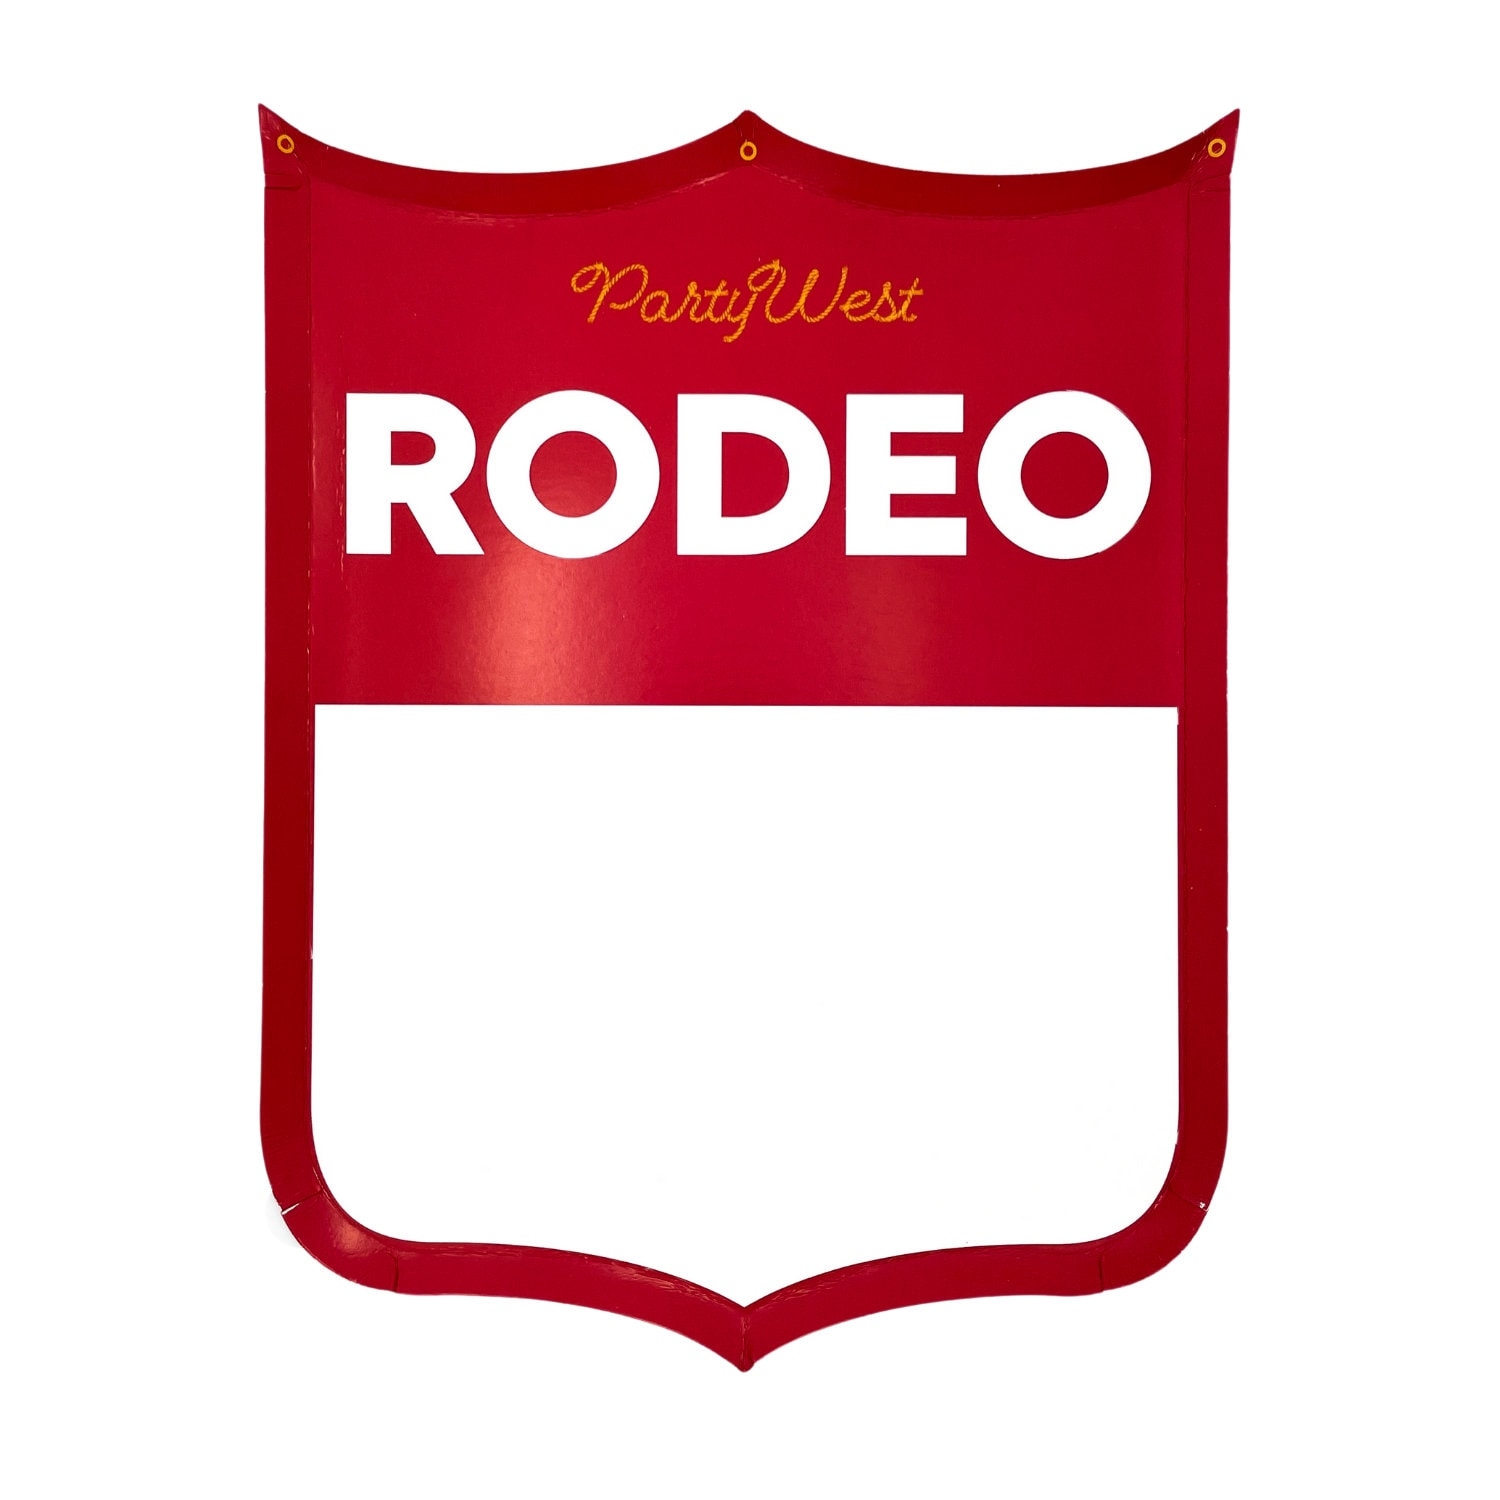 Rodeo Back Number Plates Set Of 8 Etsy New Zealand